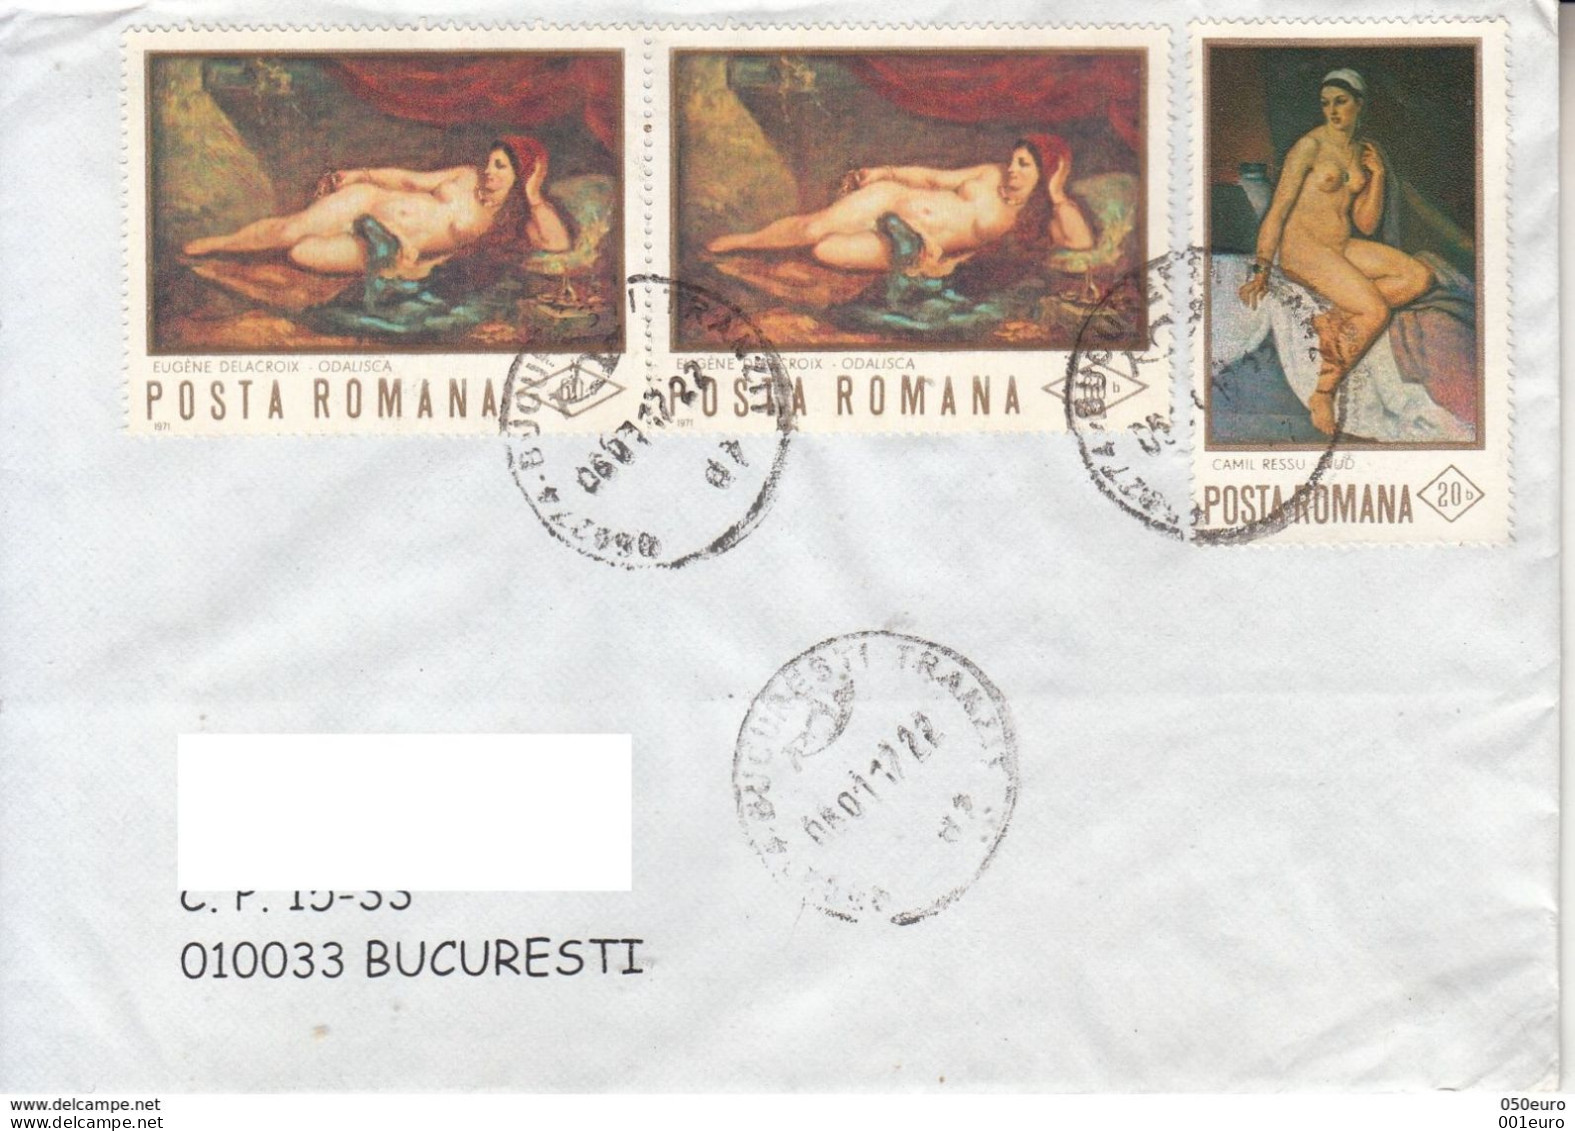 # ROMANIA : Lot Of 4 Covers Circulated As Domestic Letters In Romania #1043364880 - Registered Shipping! - Covers & Documents